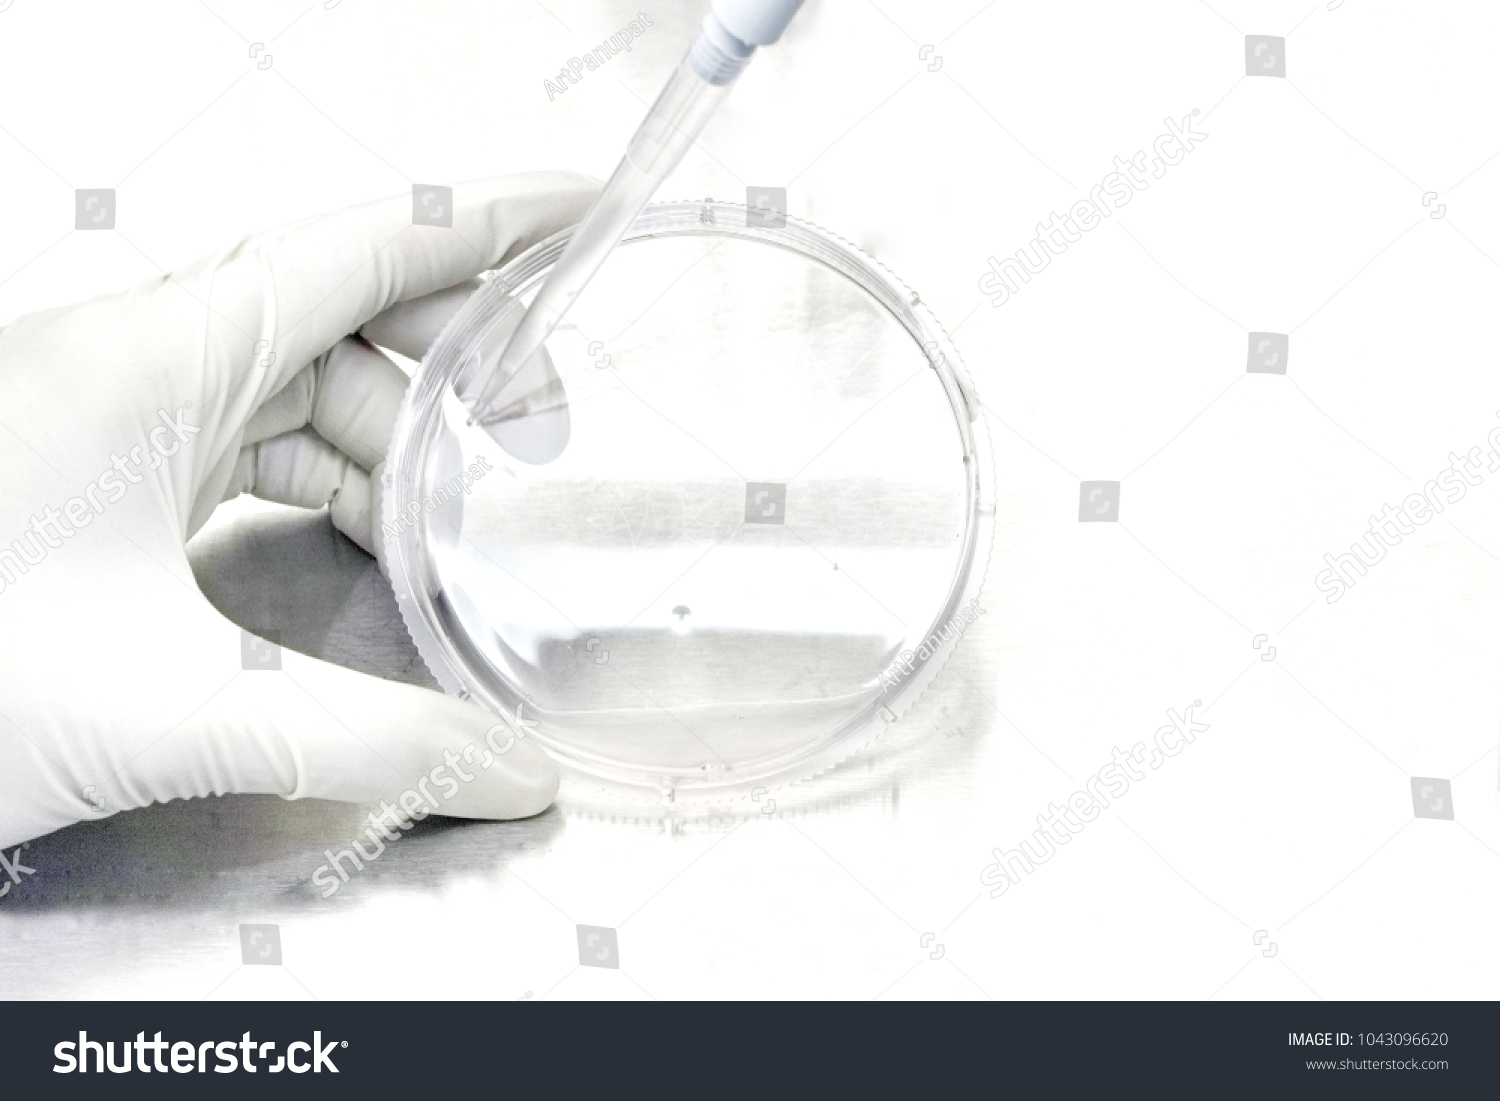 The researcher is using pipette to transfer liquid from petri dish to micro tube and centrifuge tube in the research of drugs or chemicals in the laboratory room on white background.                   #1043096620